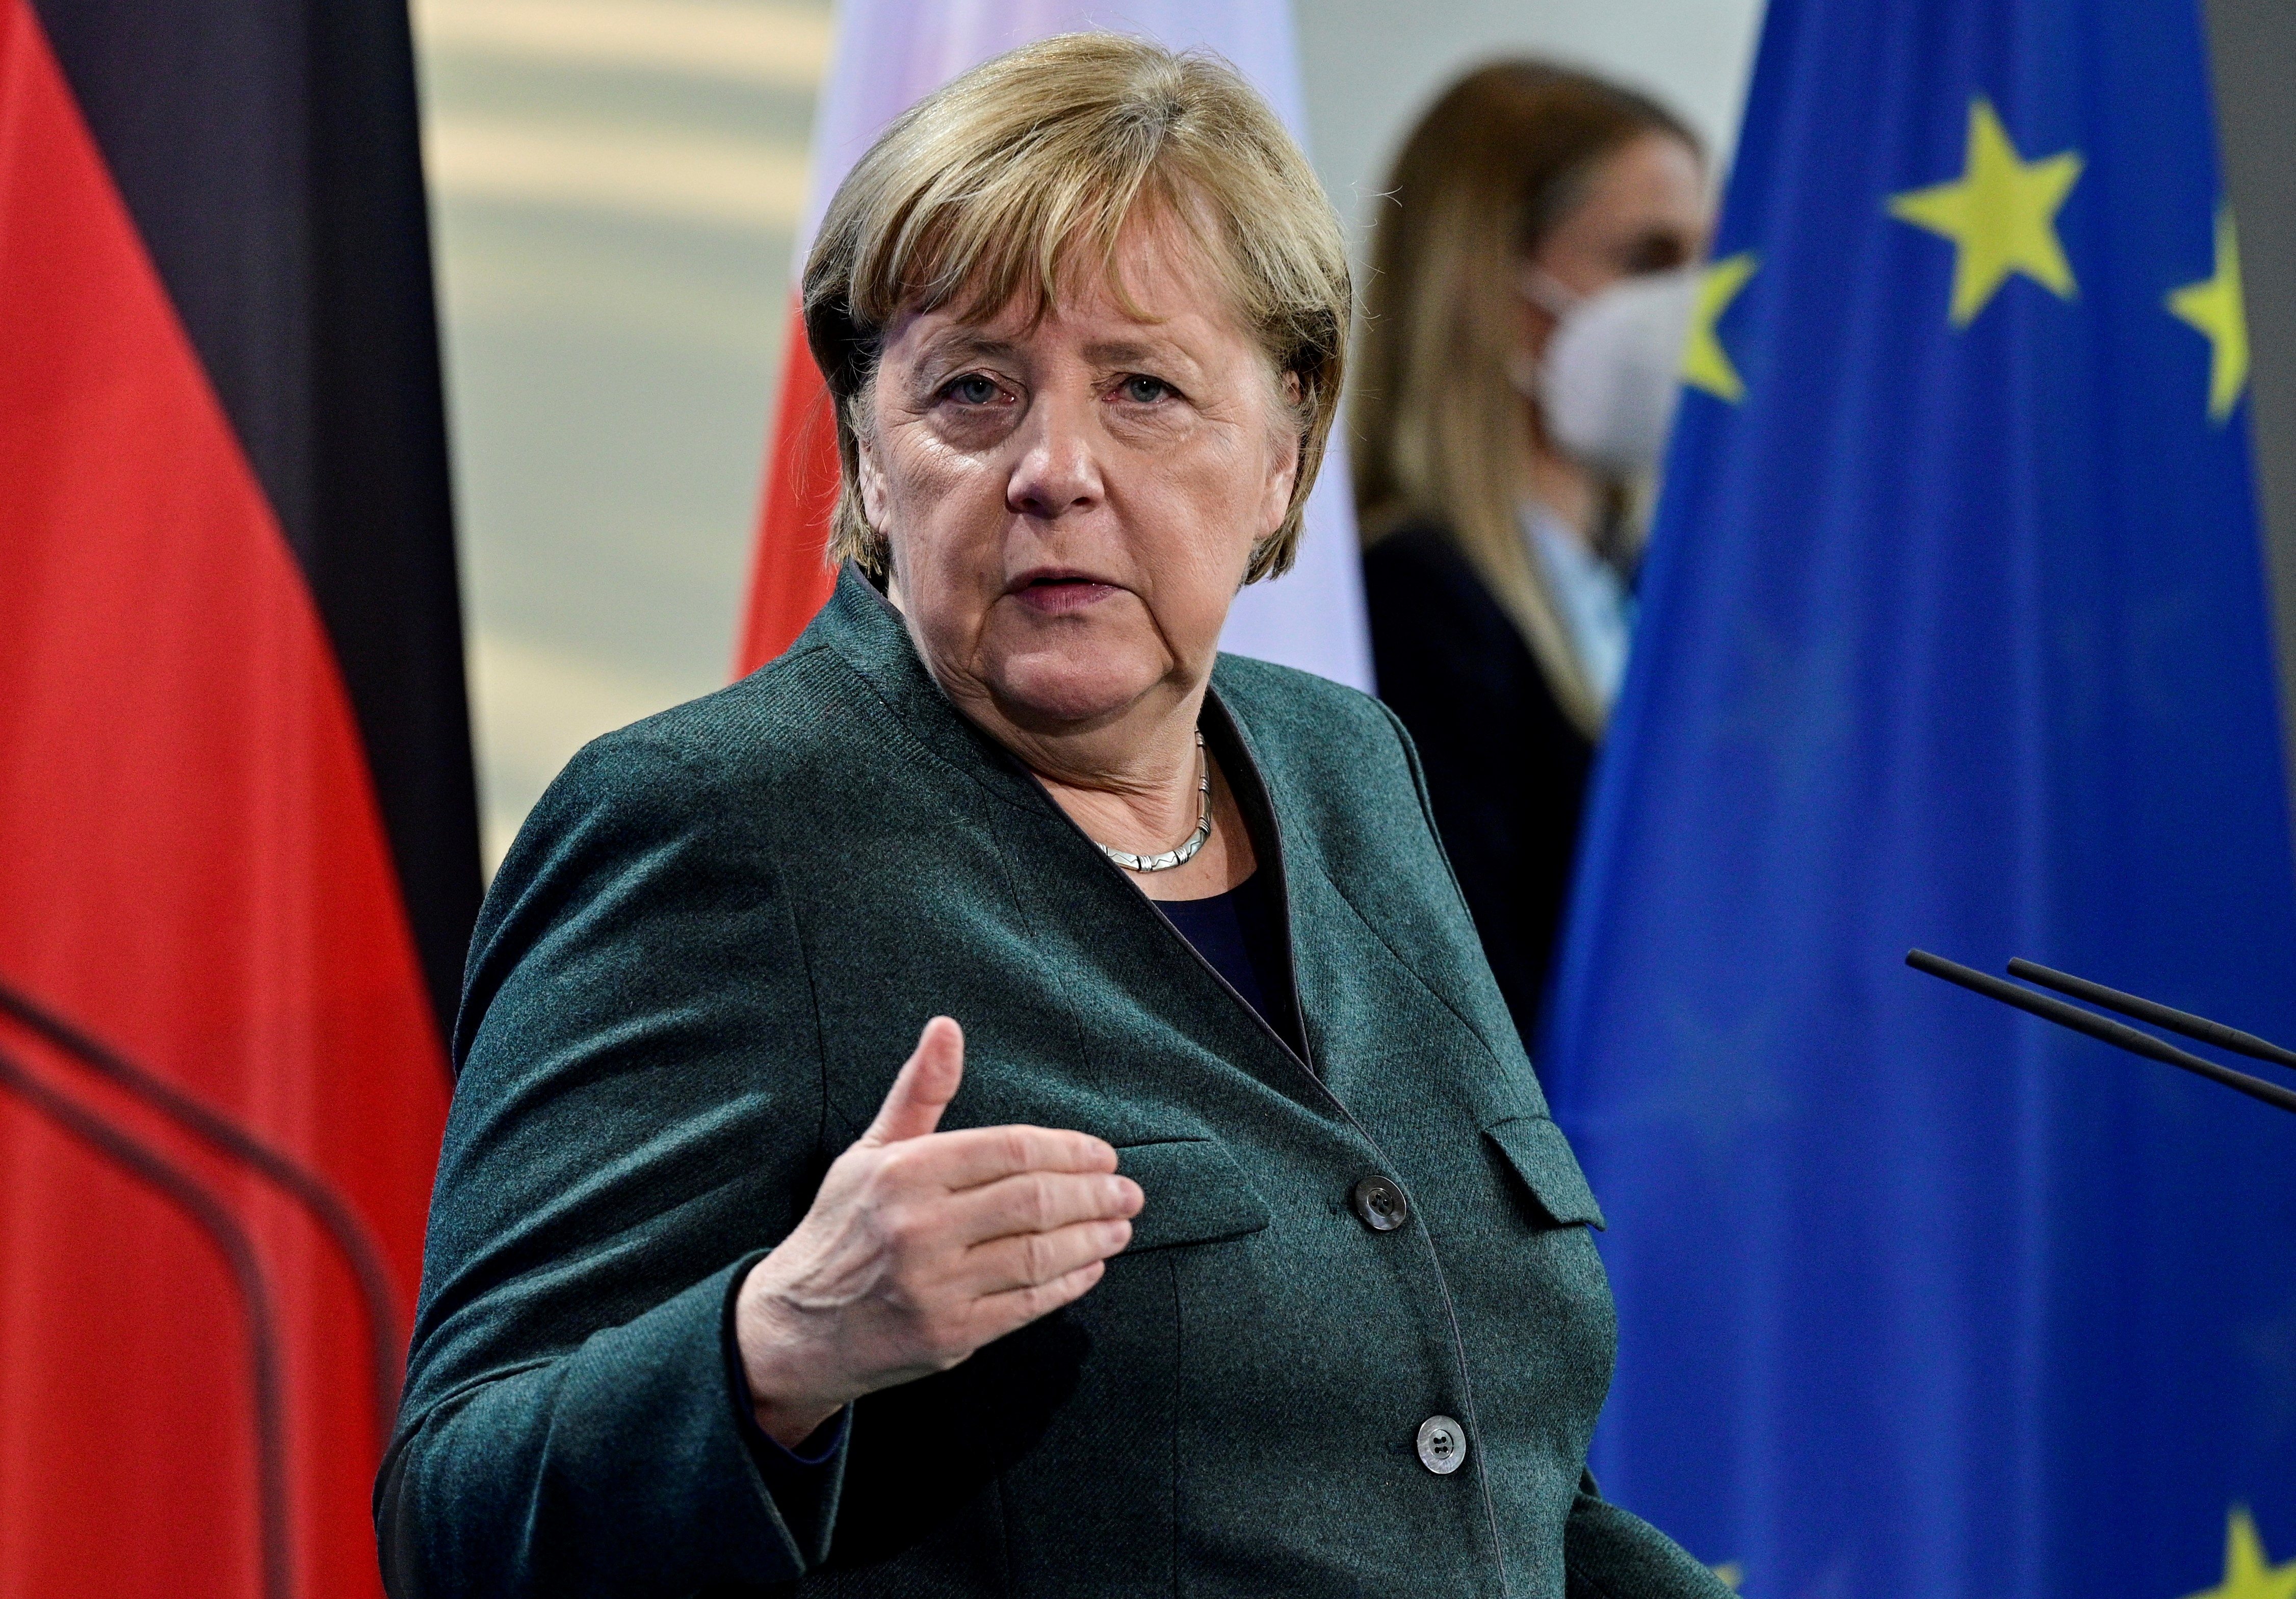 German Chancellor Angela Merkel gestures as she and Polish Prime Minister Mateusz Morawiecki (not pictured) address a joint press conference after talks in Berlin, Germany November 25, 2021. John MacDougall/Pool via REUTERS